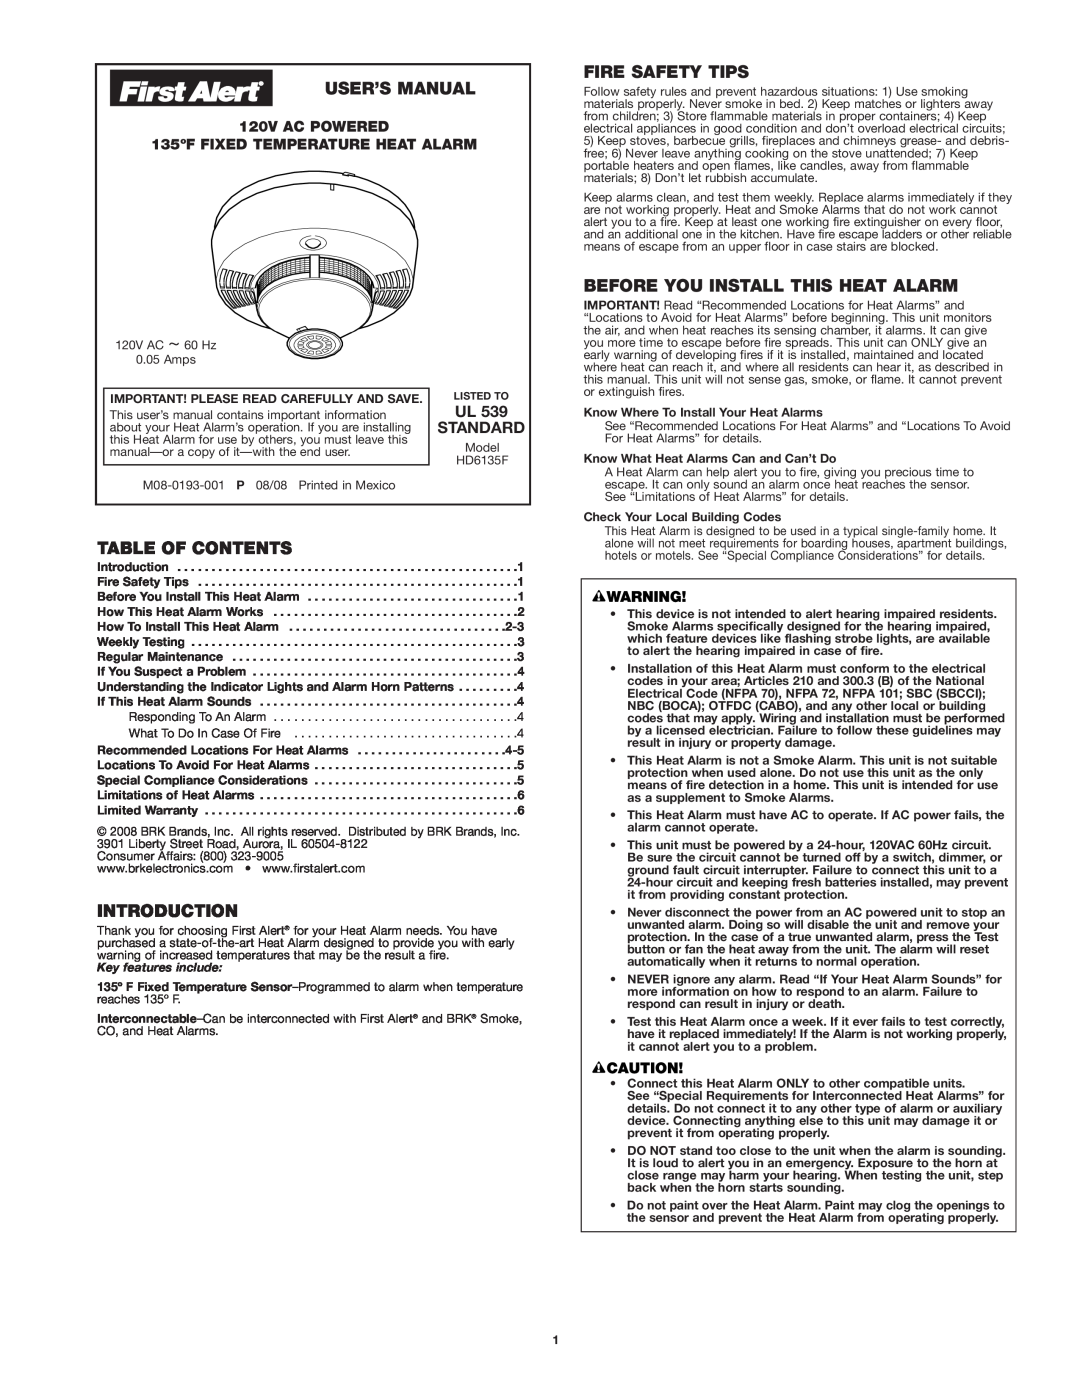 BRK electronic UL539 user manual User’S Manual, Fire Safety Tips, Before You Install This Heat Alarm, Table Of Contents 